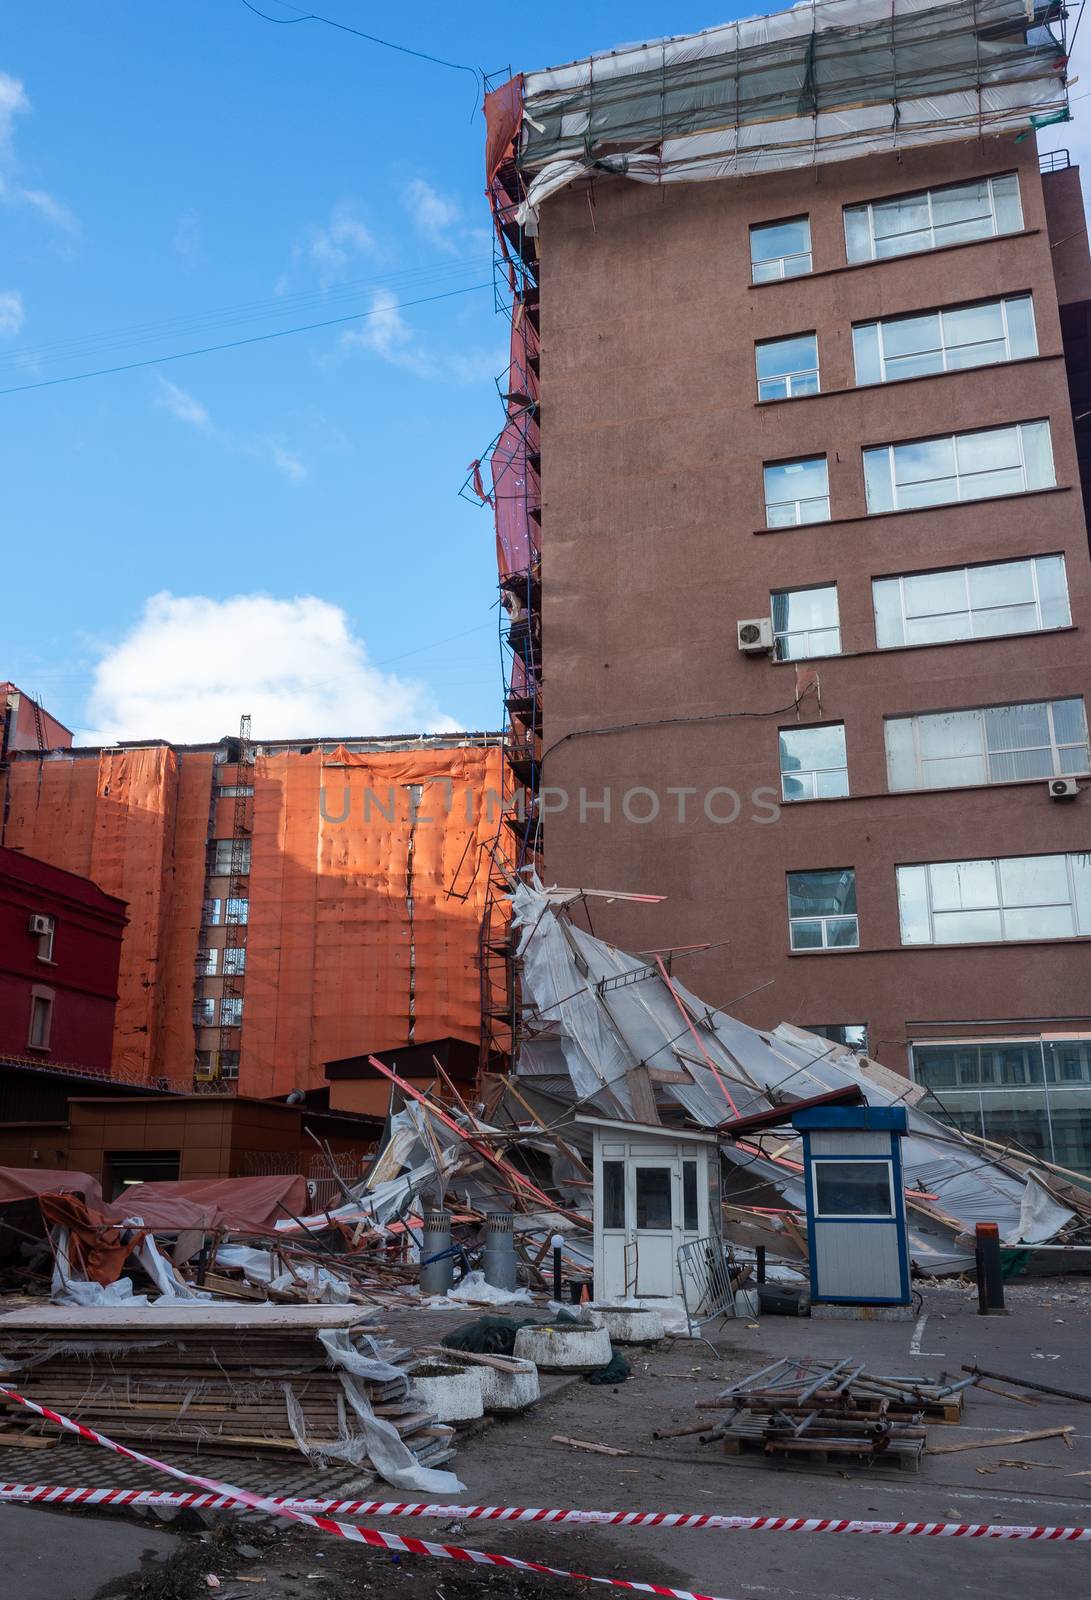 Scaffolding collapsed from a strong wind near a reconstructed multi-storey building in the city center.